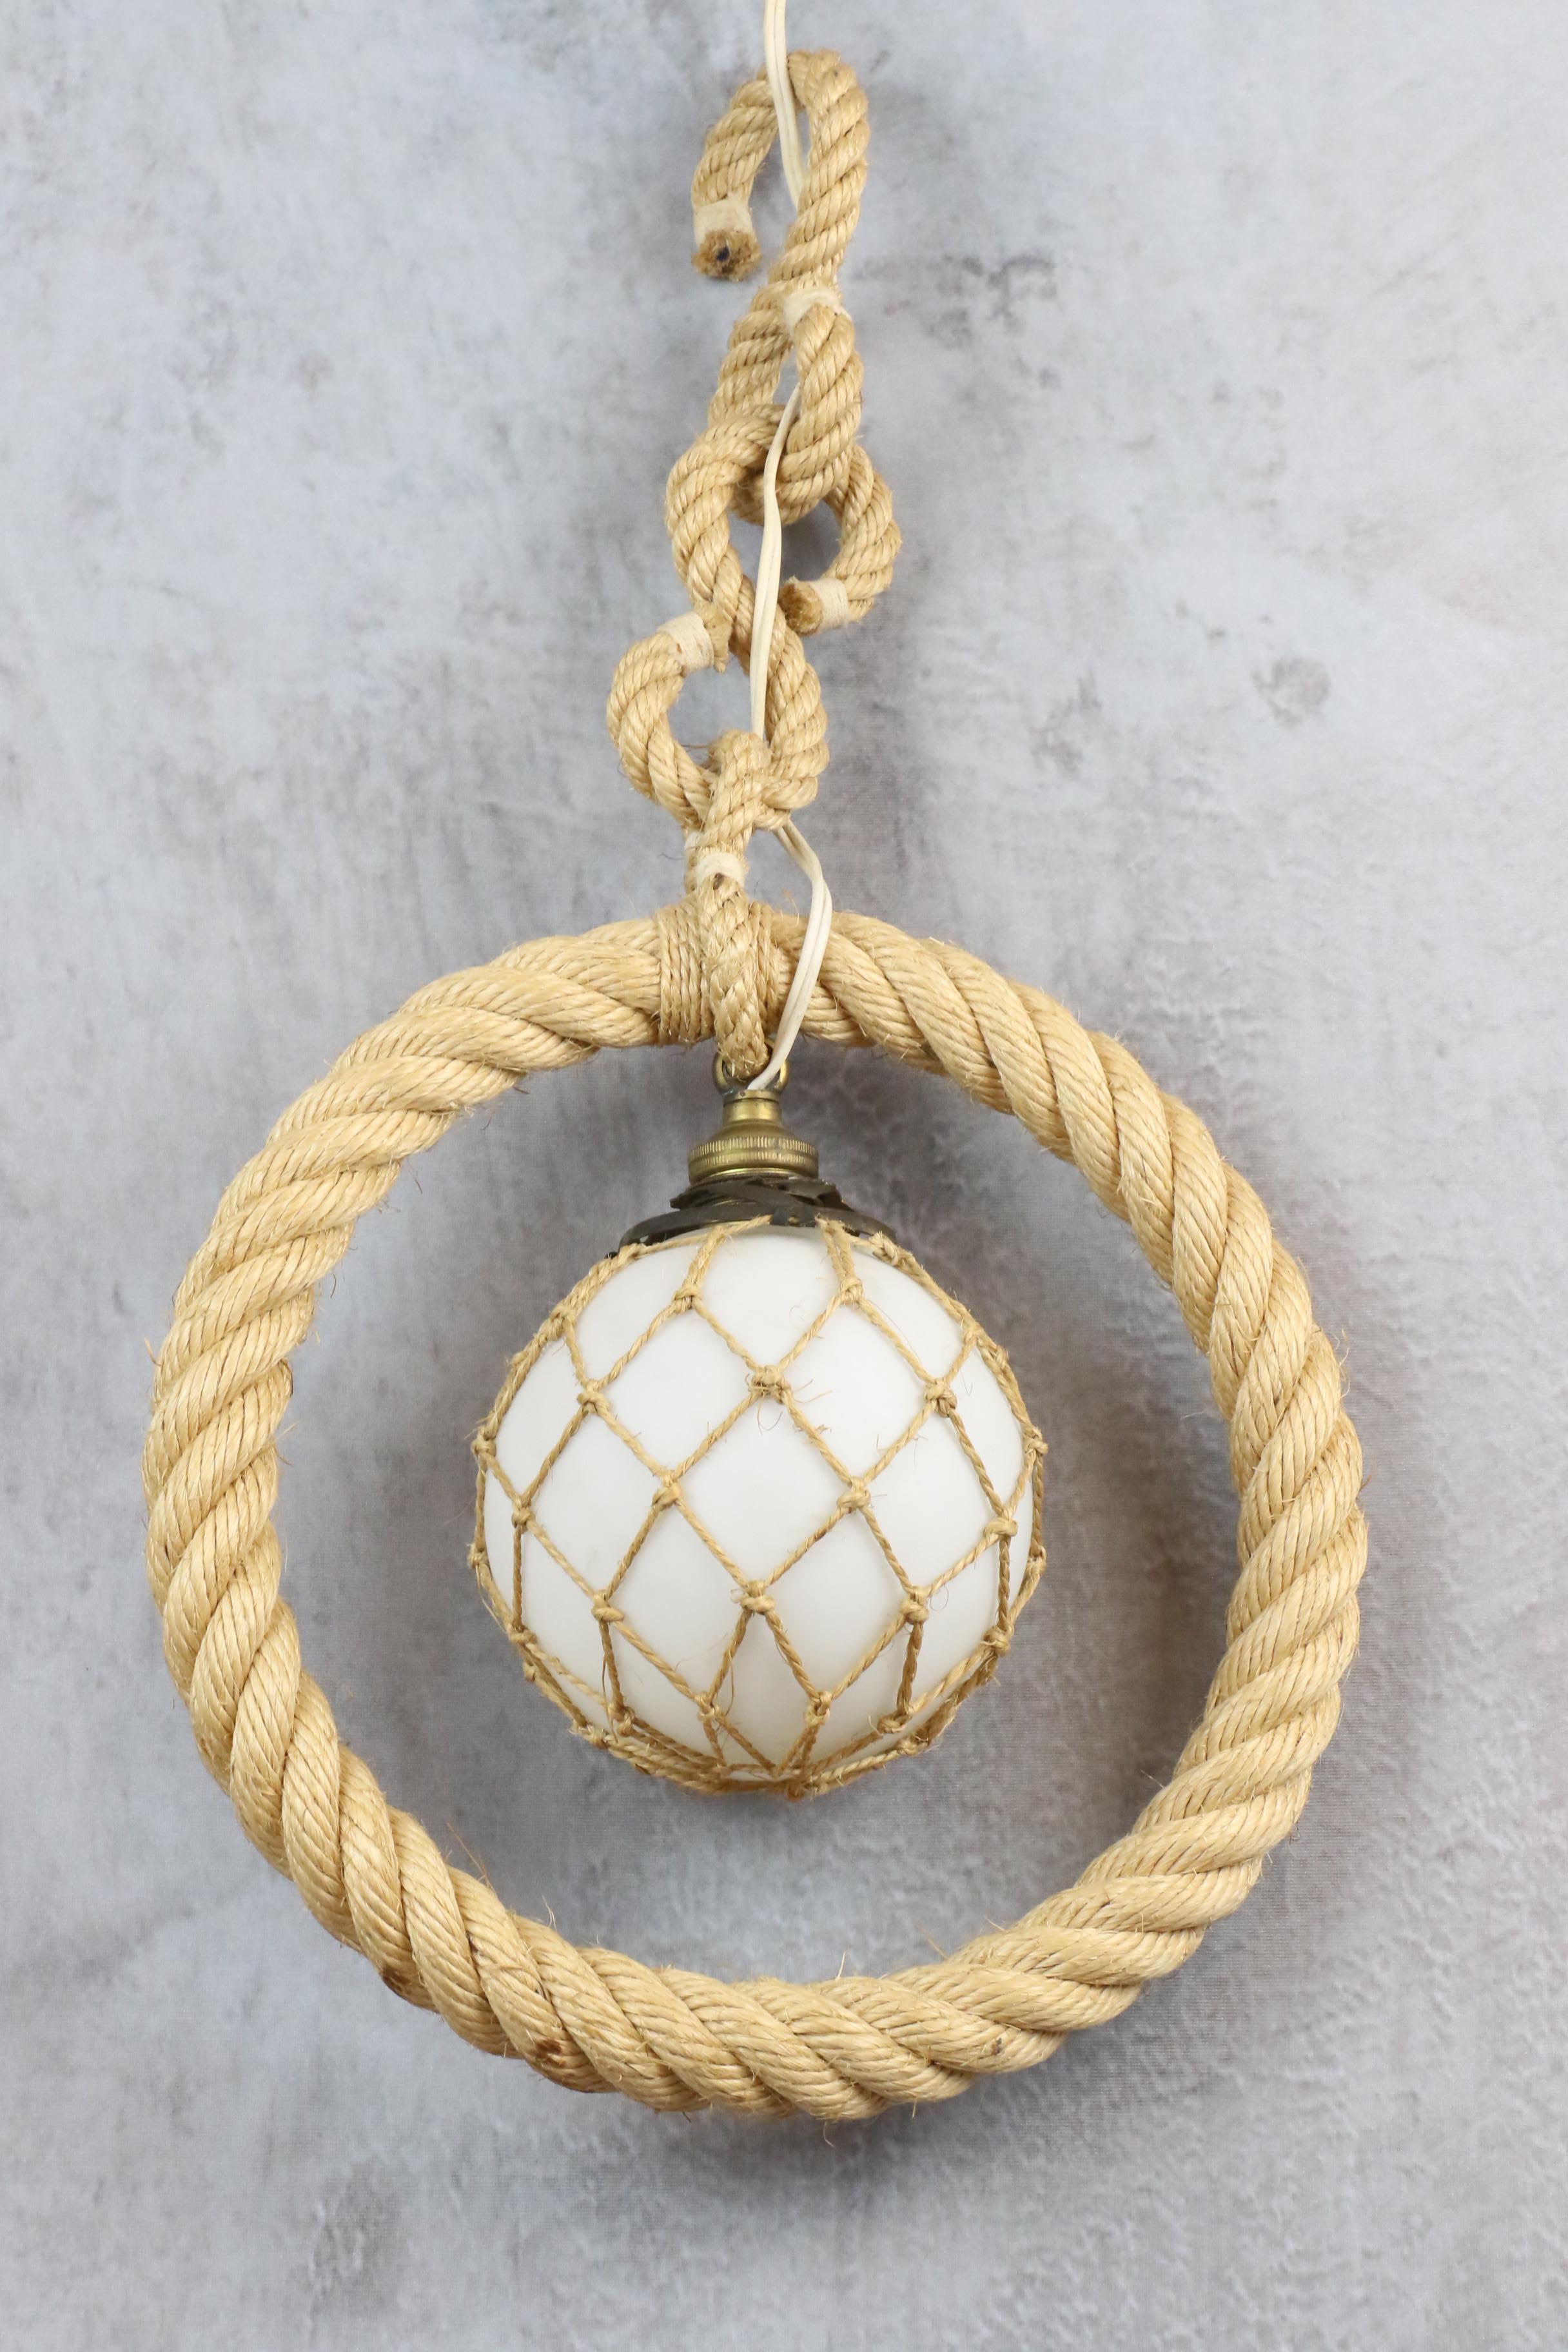 Hand-Crafted Midcentury Rope Chandelier by Adrien Audoux and Frida Minet, circa 1960 For Sale